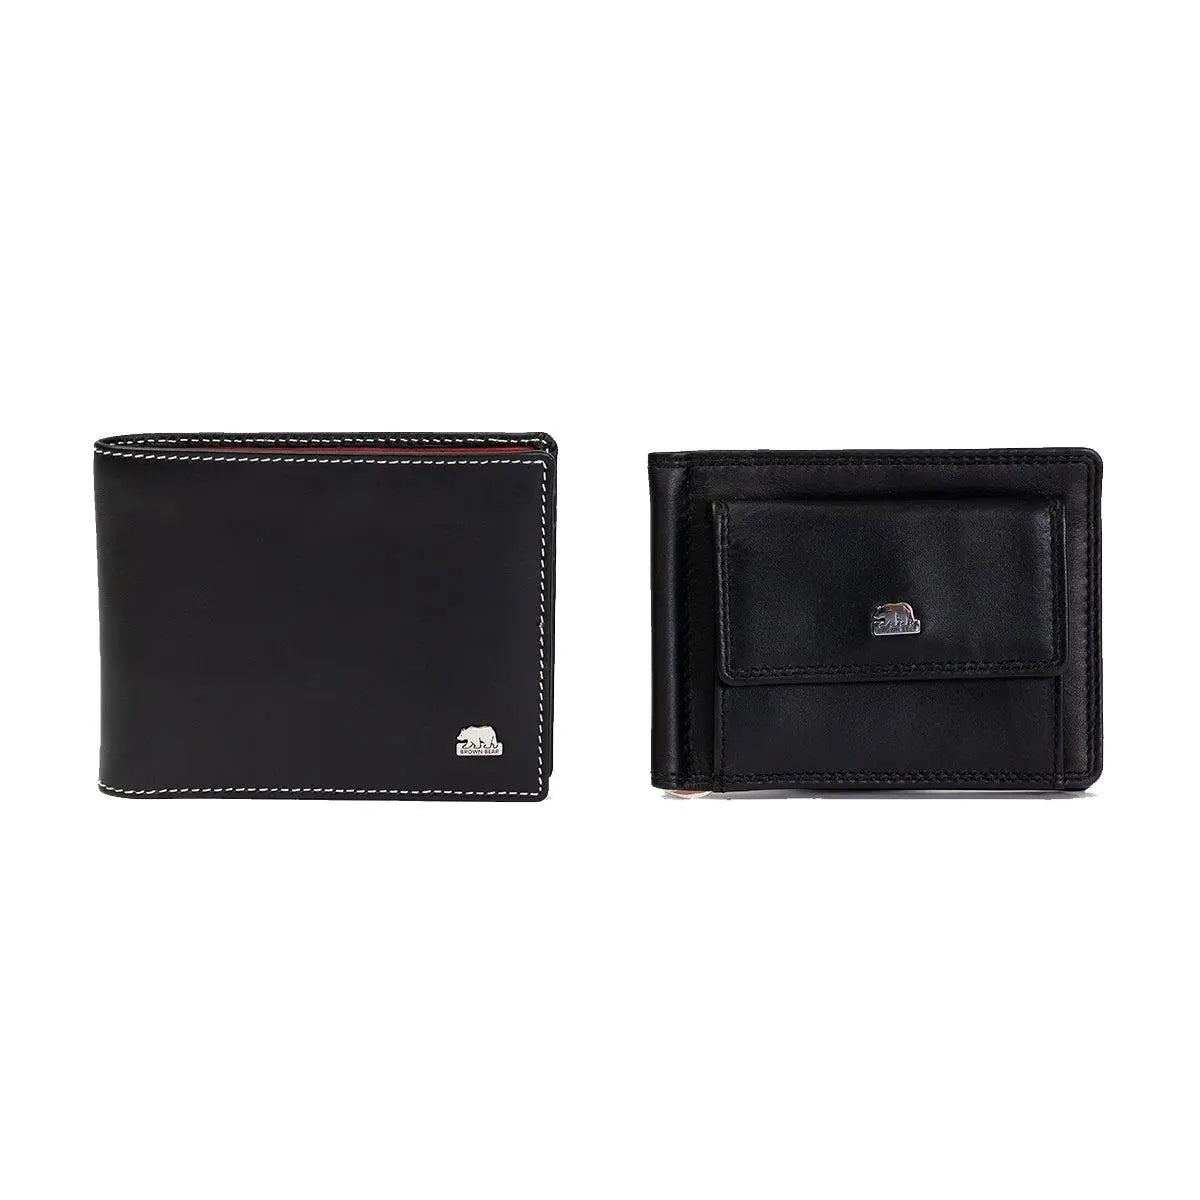 Money Clip Leather Wallet - Brown - FOXHACKLE